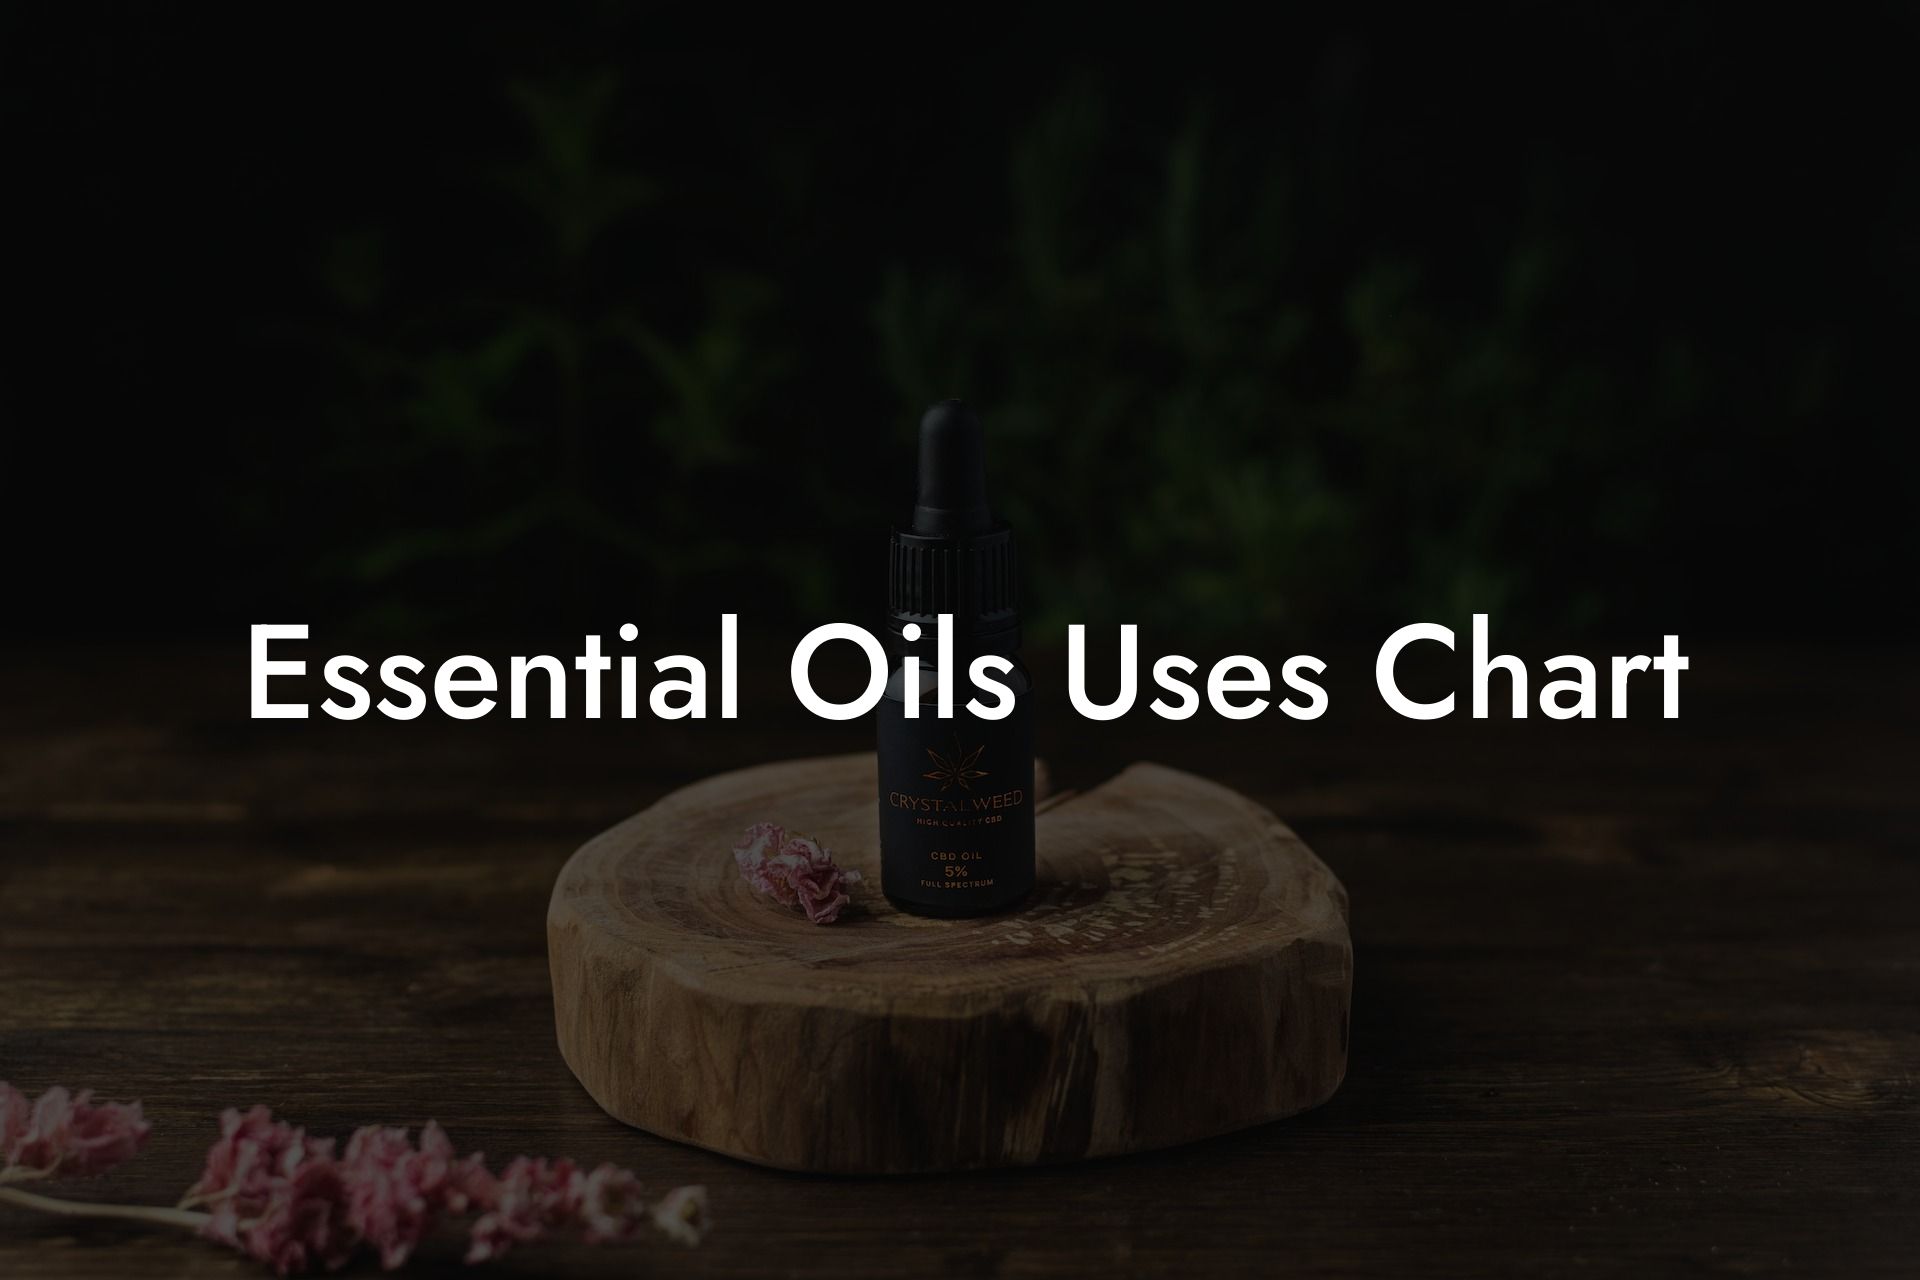 Essential Oils Uses Chart